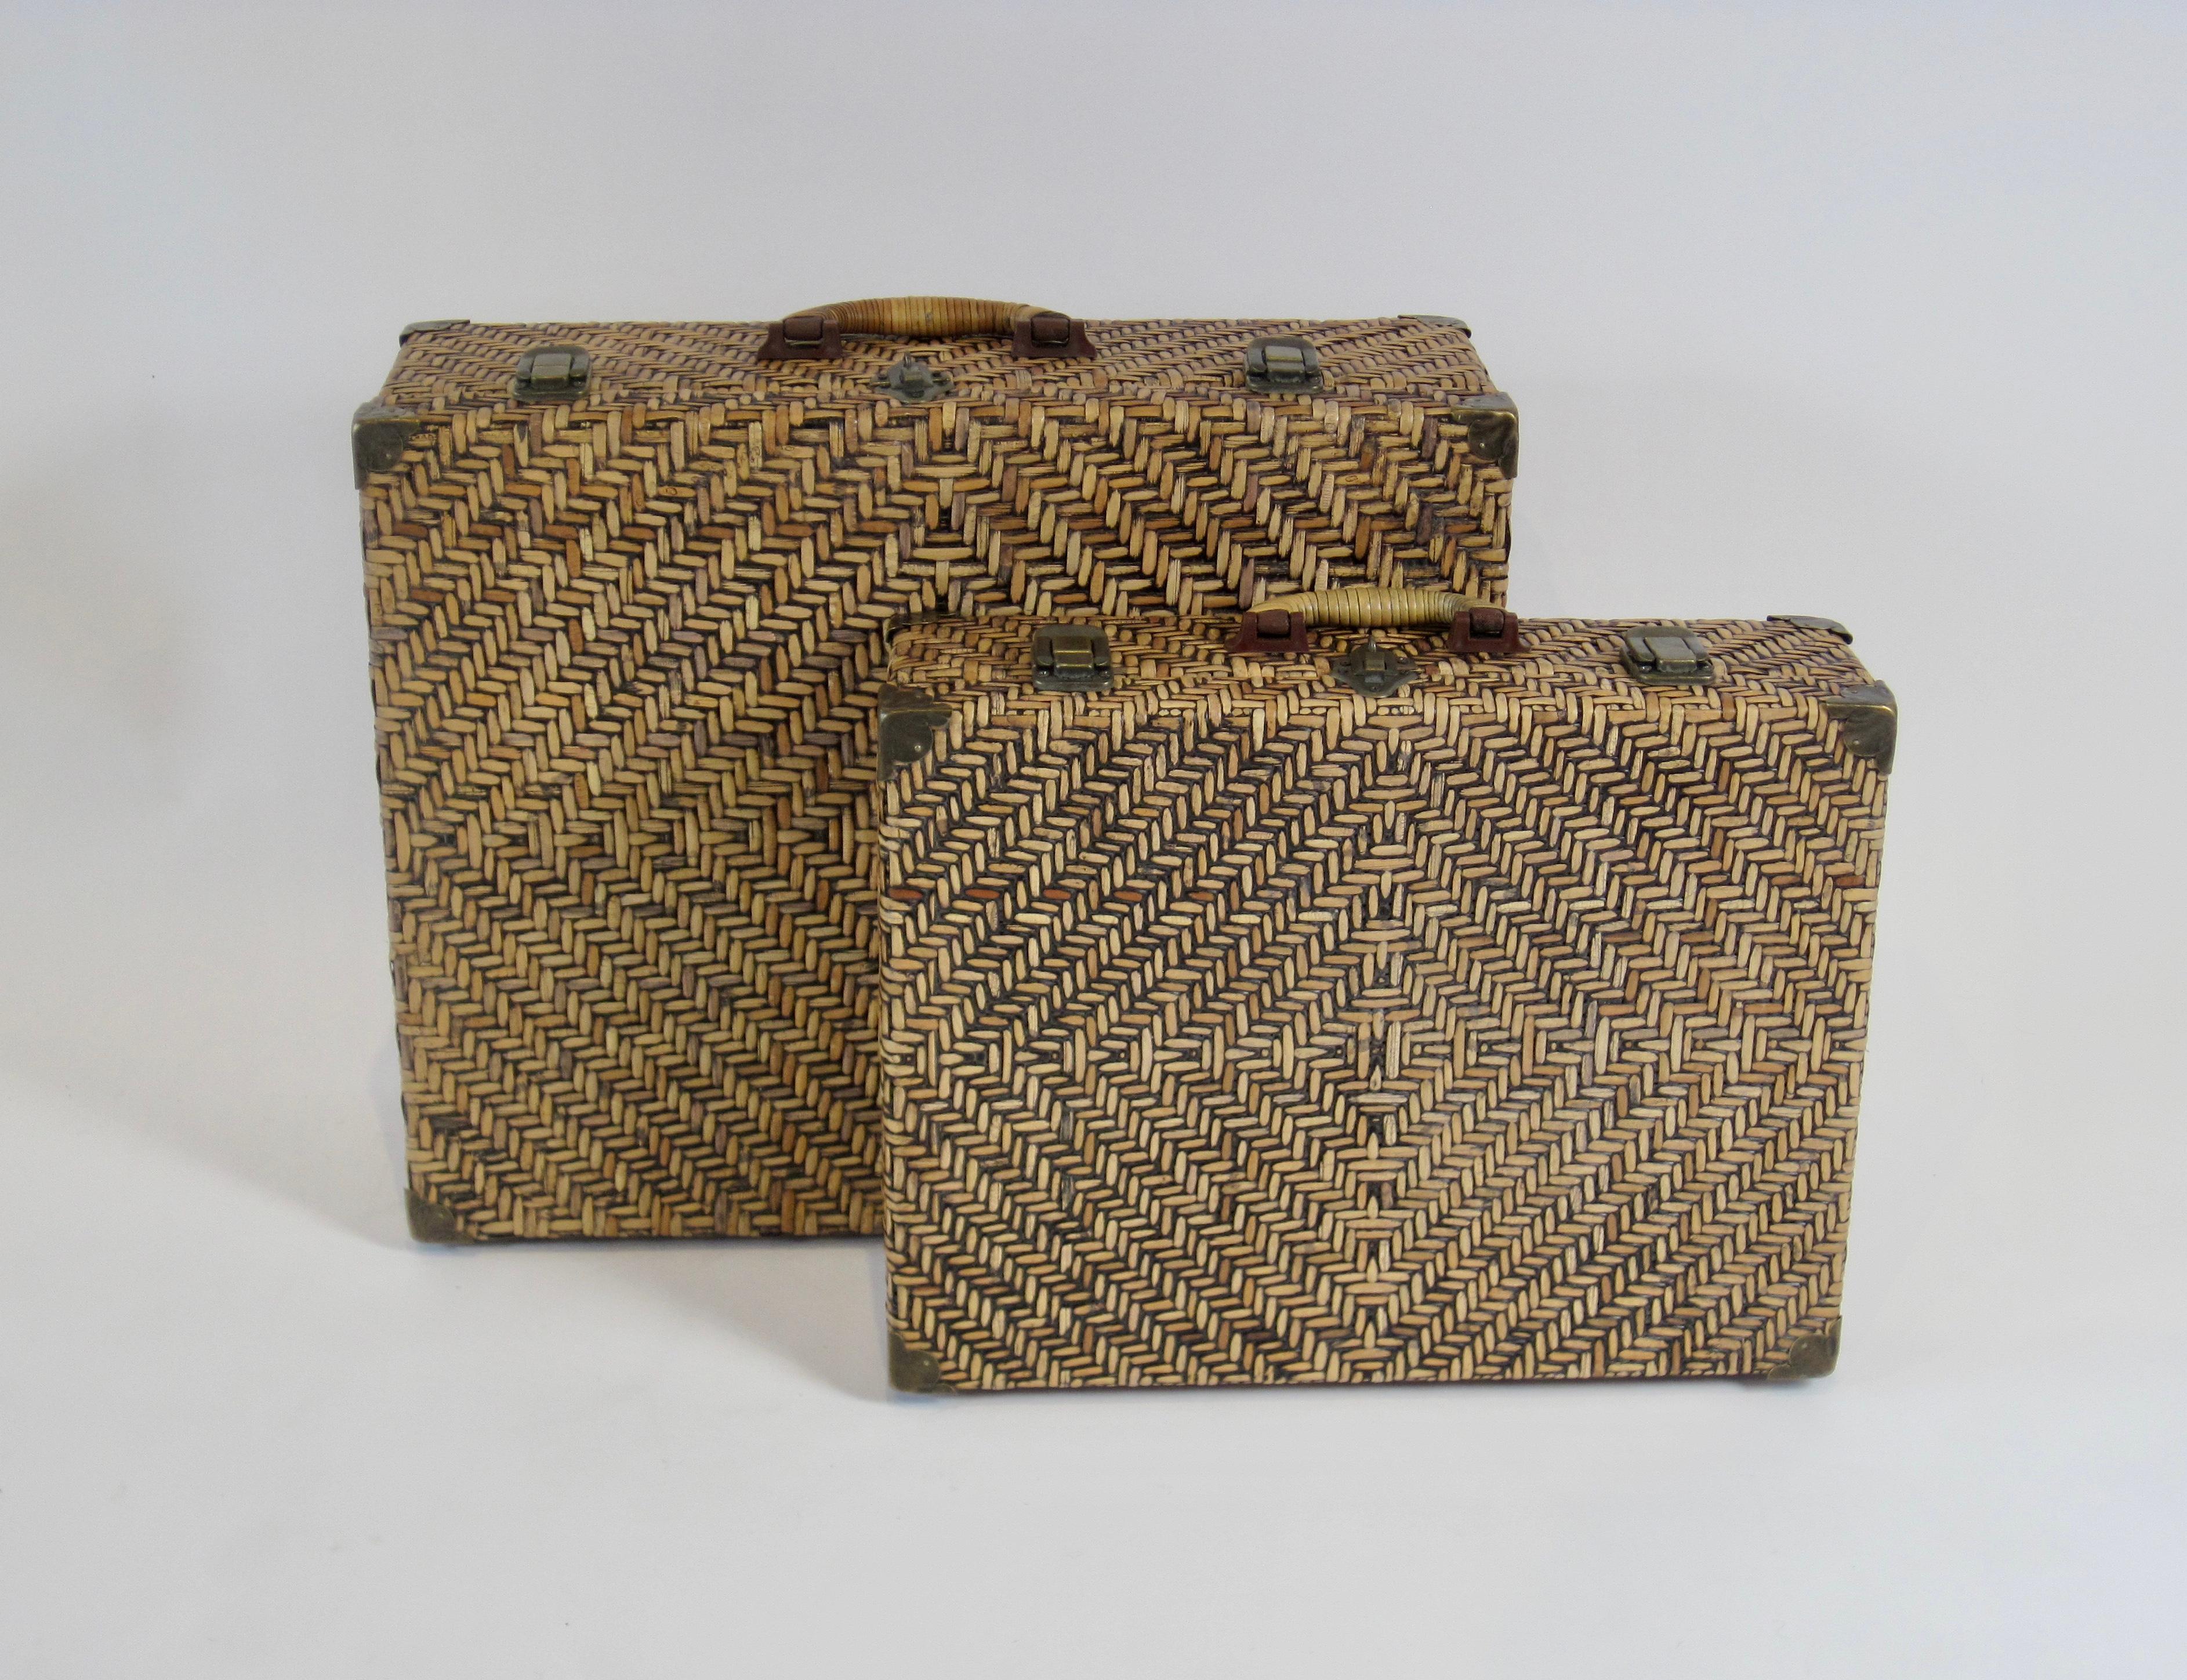 Woven Rattan Suitcase Pair with Brass Hardware For Sale 1